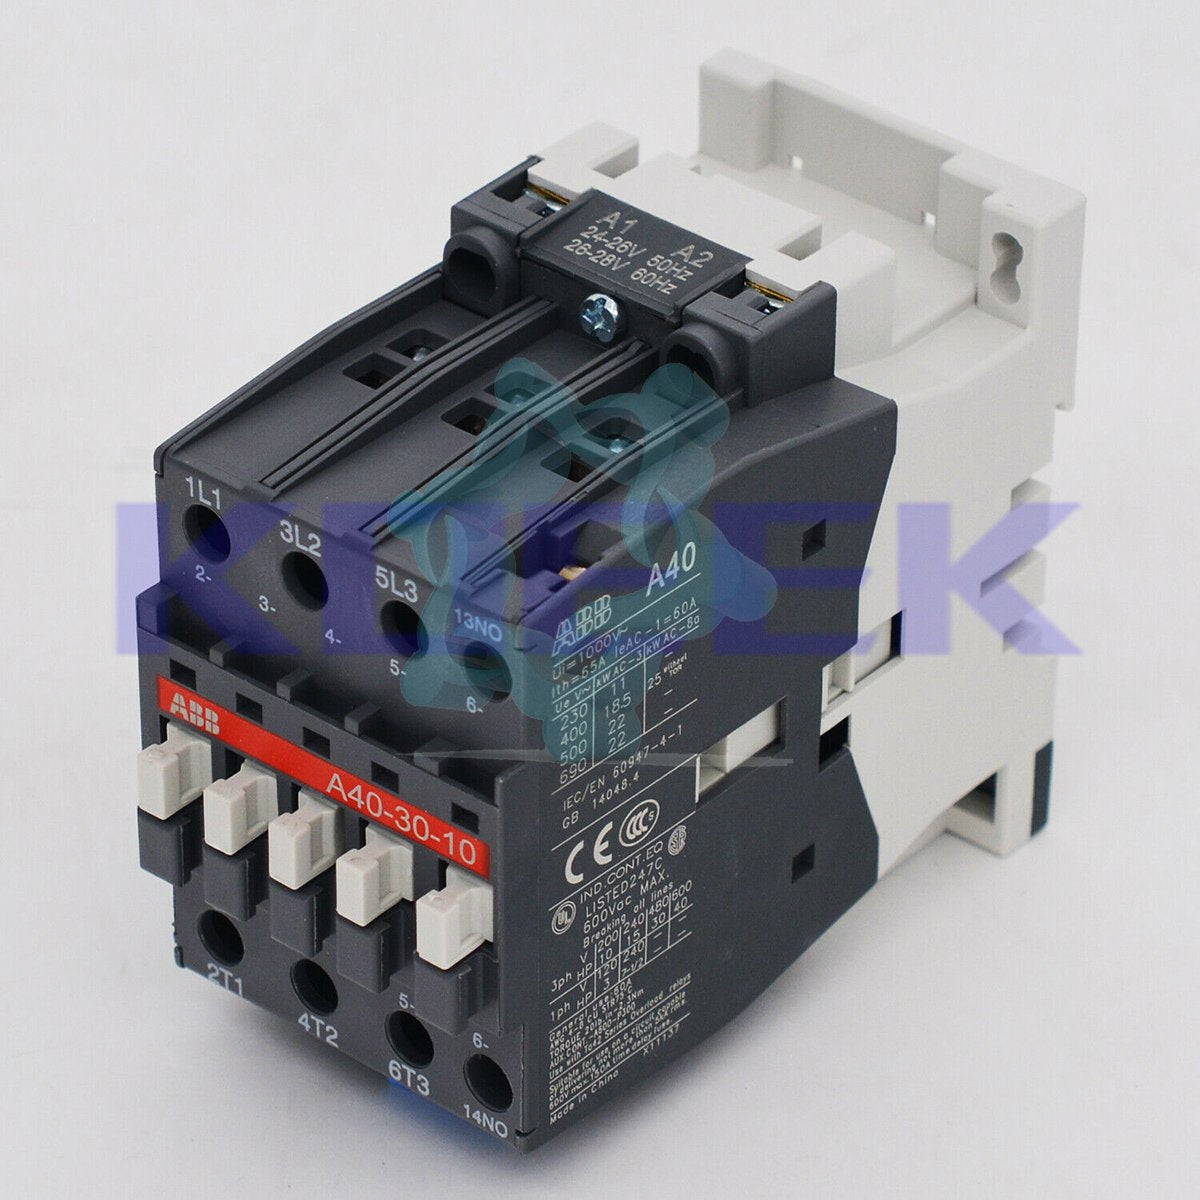 A50-30-11 KOEED 1, 80%, ABB, import_2020_10_10_031751, Other